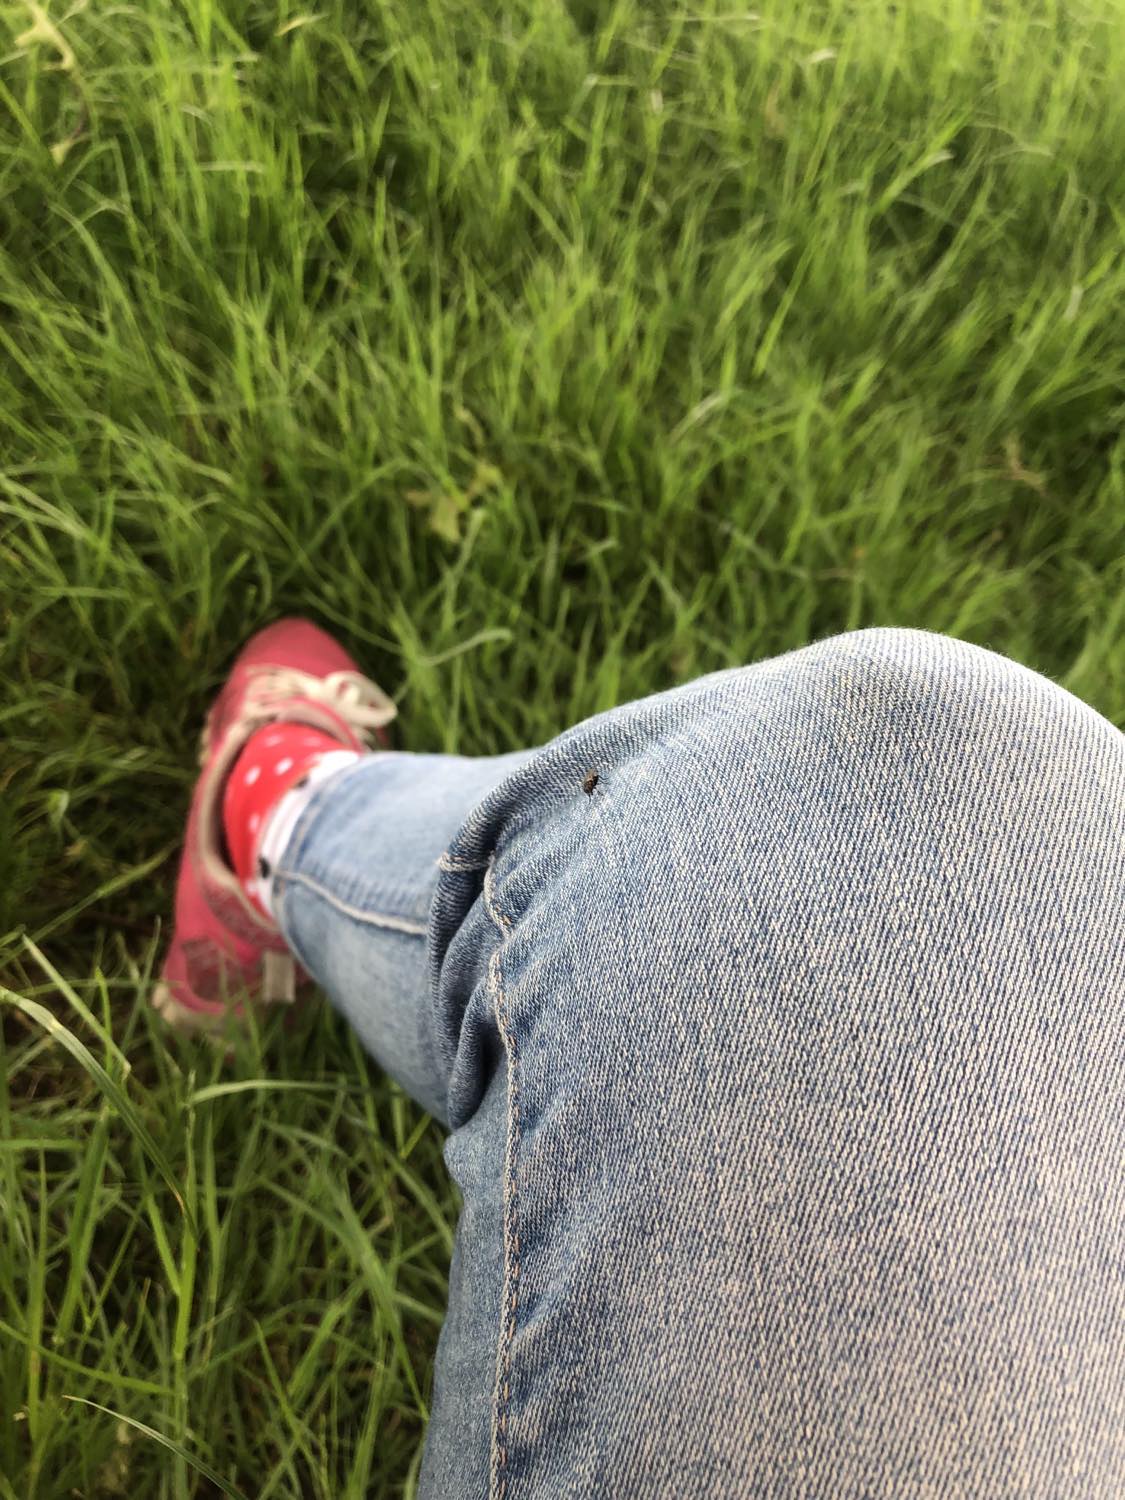 A lil baby fly sitting on Kabutroid's jeans near the knee, with the grass and Kabs's pink shoes and red spotted socks visible as well